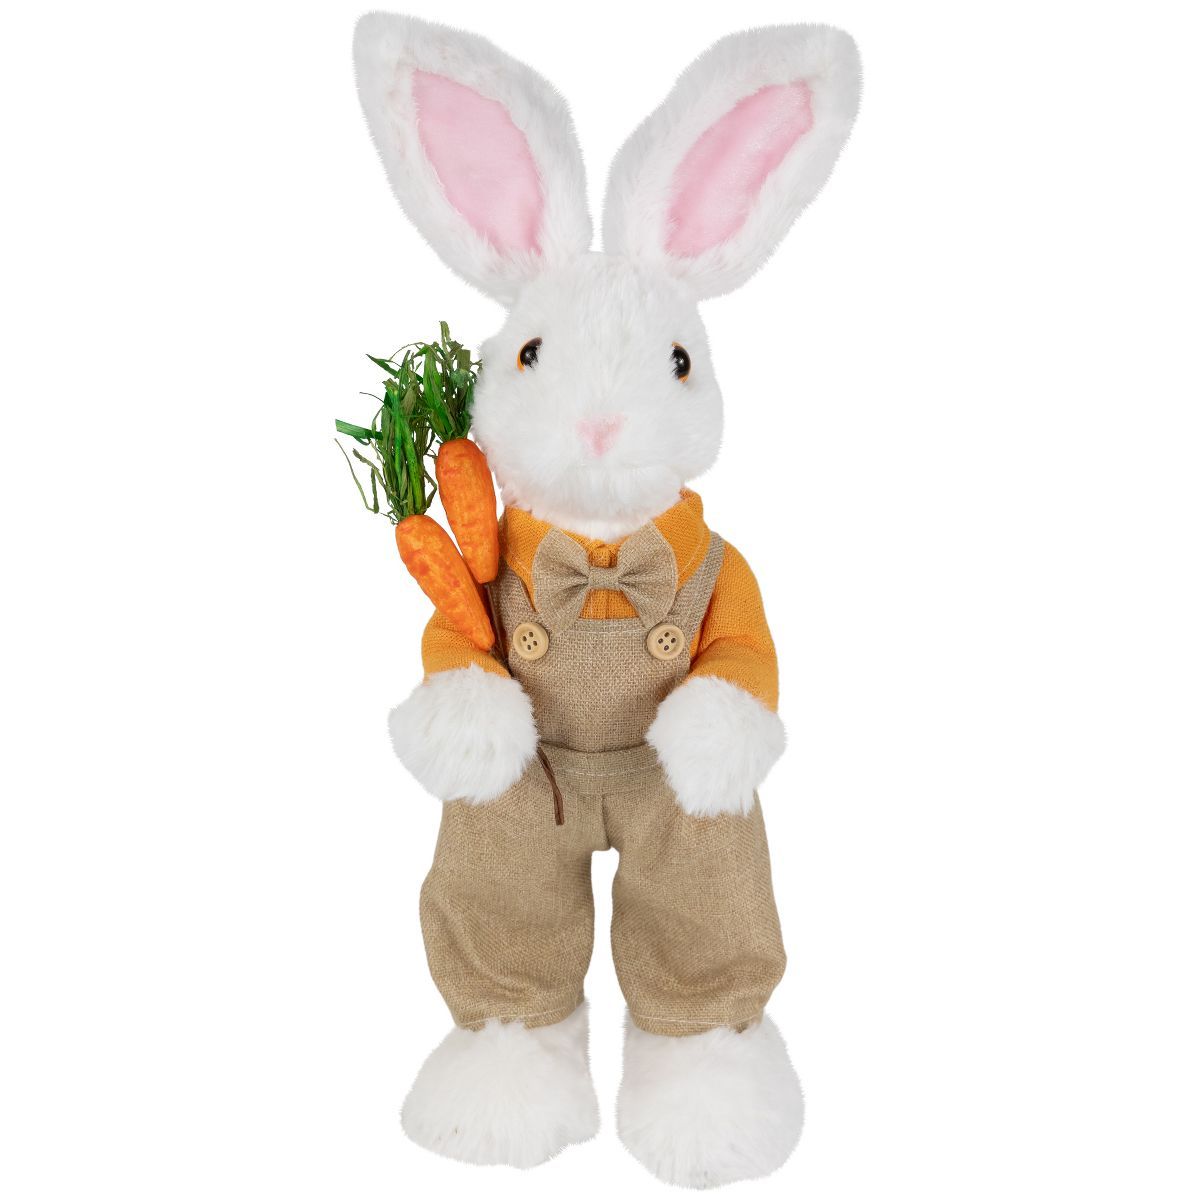 Northlight Plush Standing Boy Rabbit with Overalls Easter Figure - 15" - White and Tan | Target